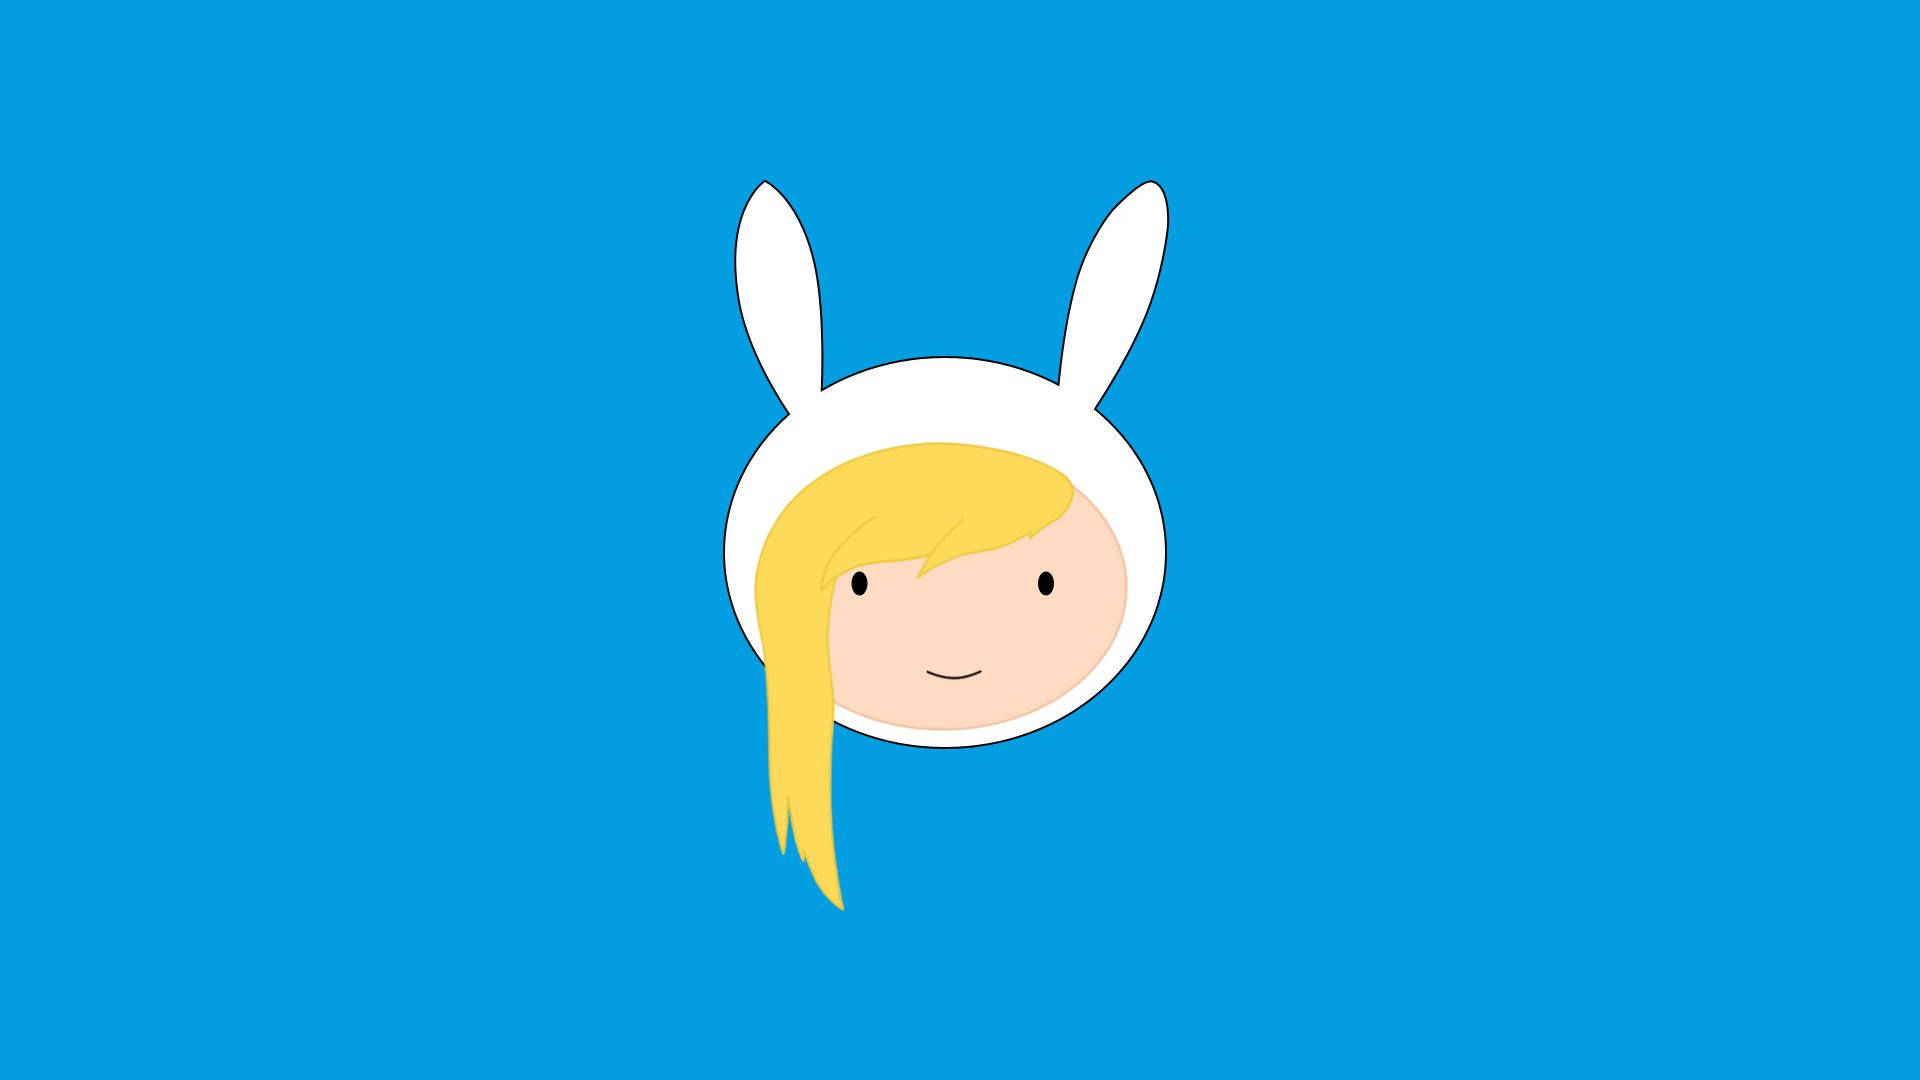 Fionna the Human Ready to Embark on an Adventure! Wallpaper